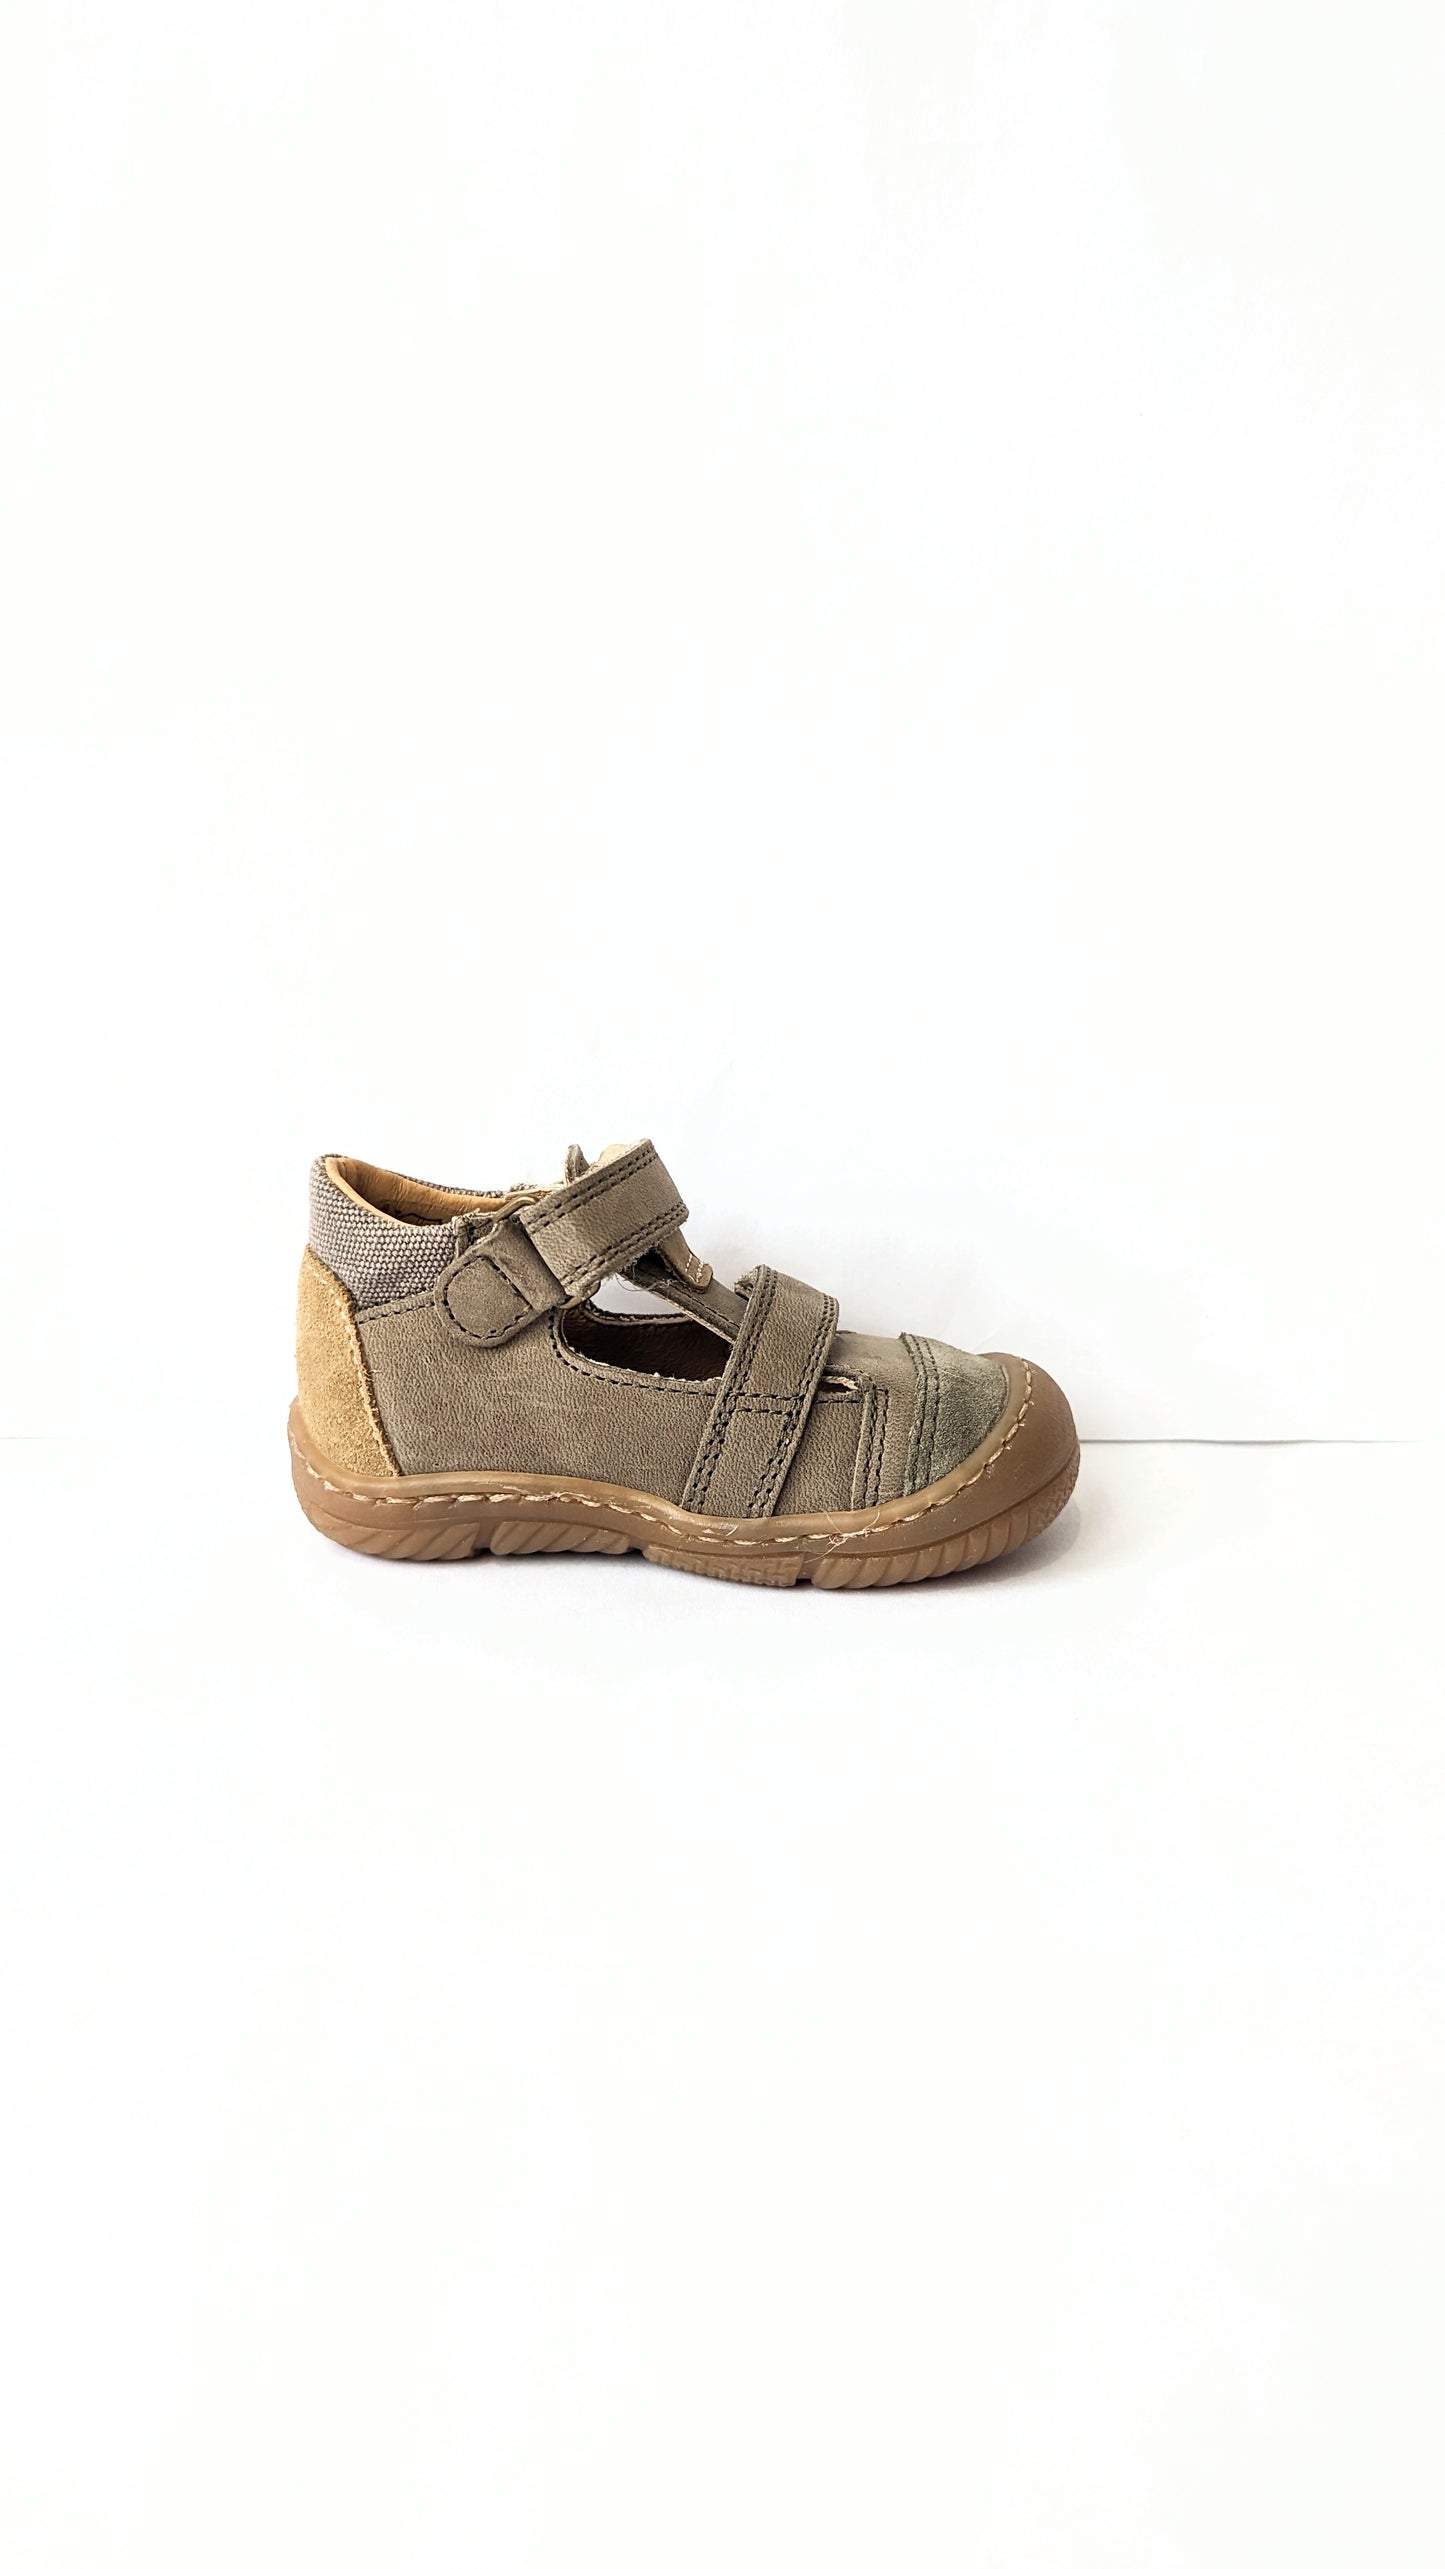 A boys shoe by Bopy, style Jacour, in khaki nubuck with double velcro fastening and toe bumper. Right side view.